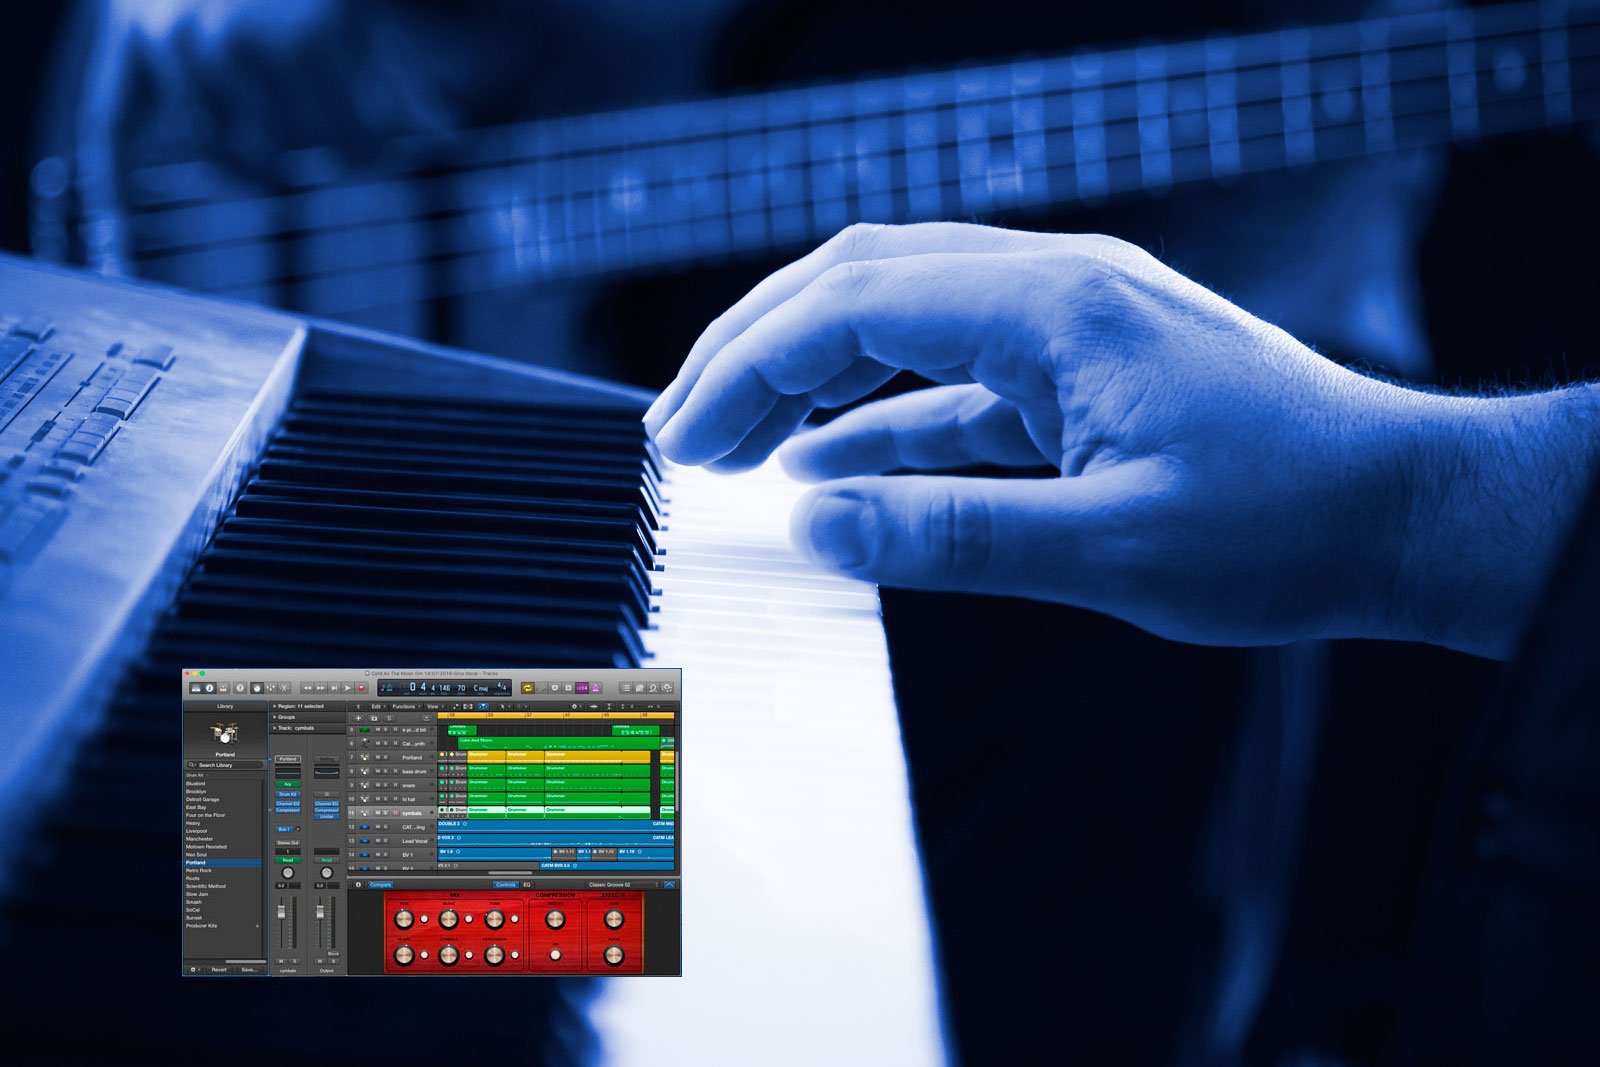 image of playing the piano with bass guitarist in background. Plus image of Logic Pro X interface.